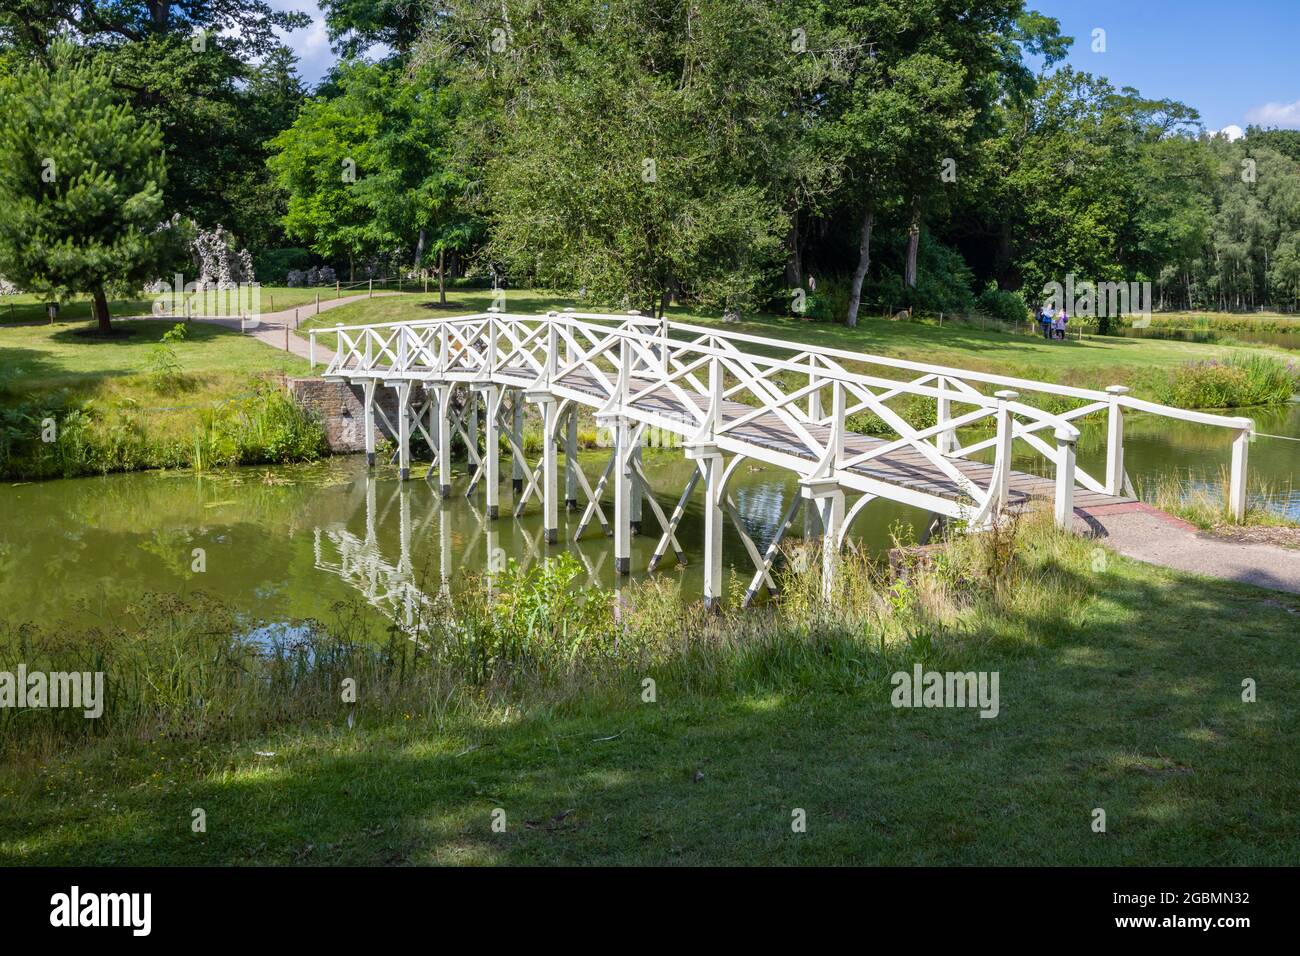 Reconstructed white wooden Chinese Bridge in the Hamilton Landscapes of Painshill Park, landscaped gardens in Cobham, Surrey, south-east England, UK Stock Photo